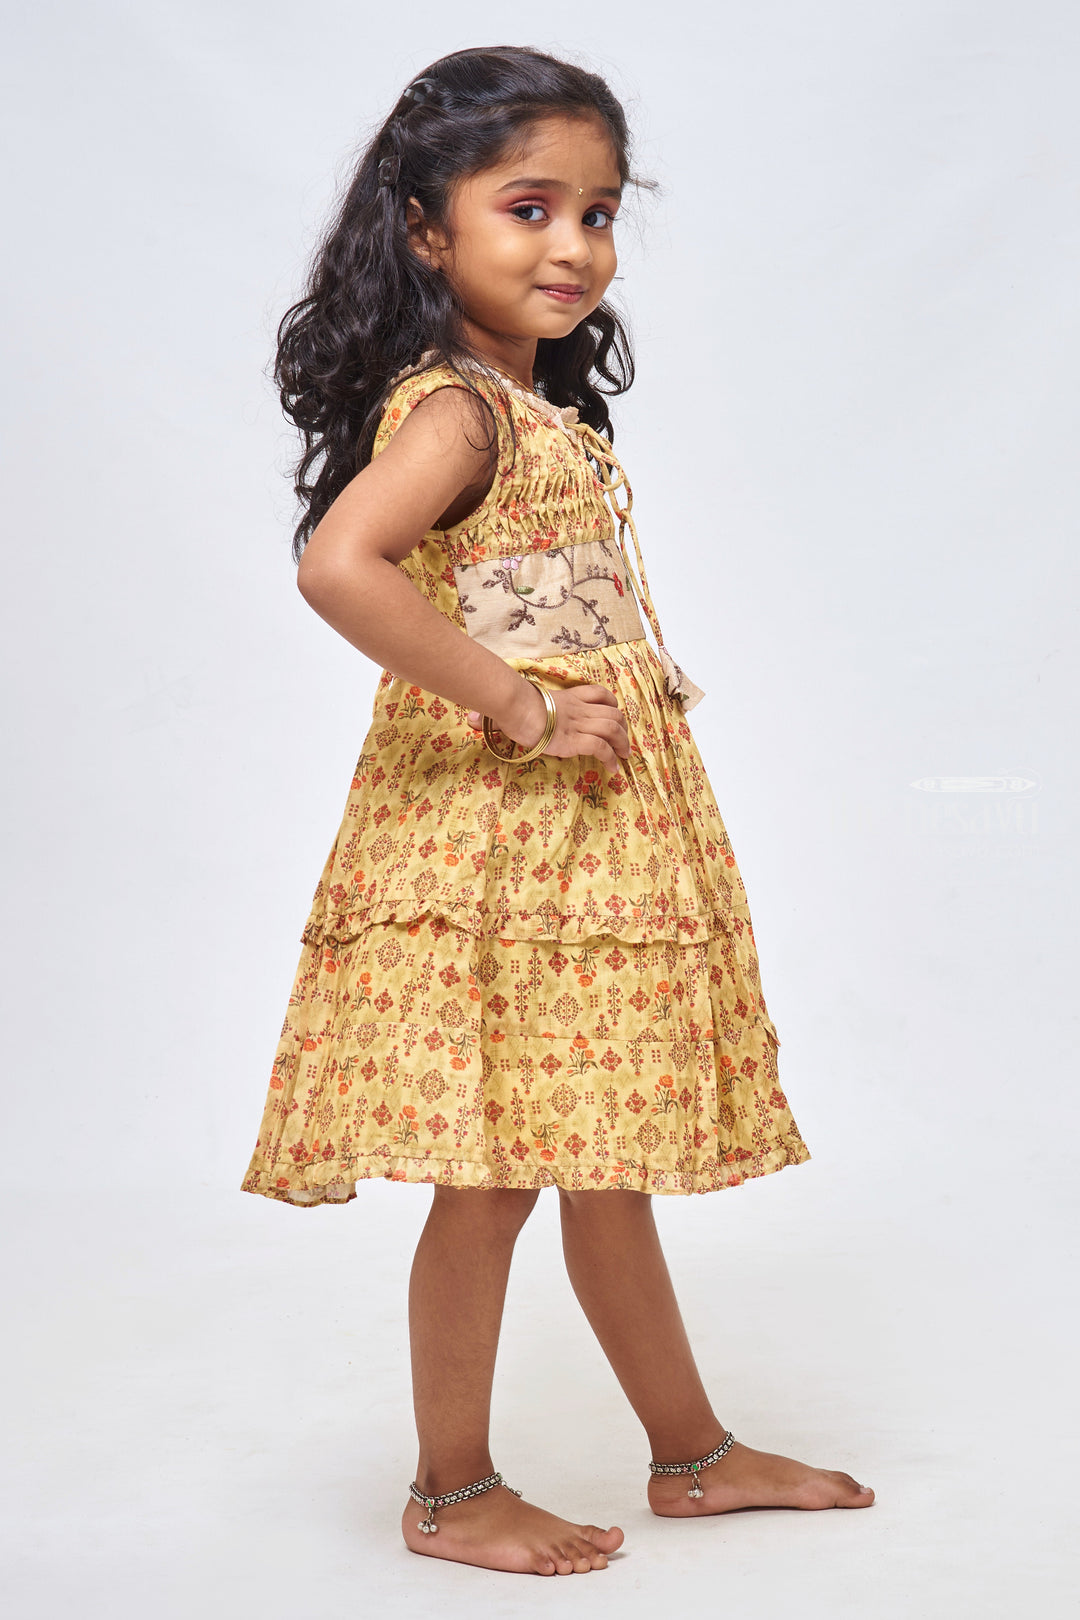 The Nesavu Girls Cotton Frock Sunny Vibes: Floral Printed Pleated Yellow Cotton Frock for Girls Nesavu Shop Elegant Cotton Frocks: Stylish & Casual Dresses for Kids